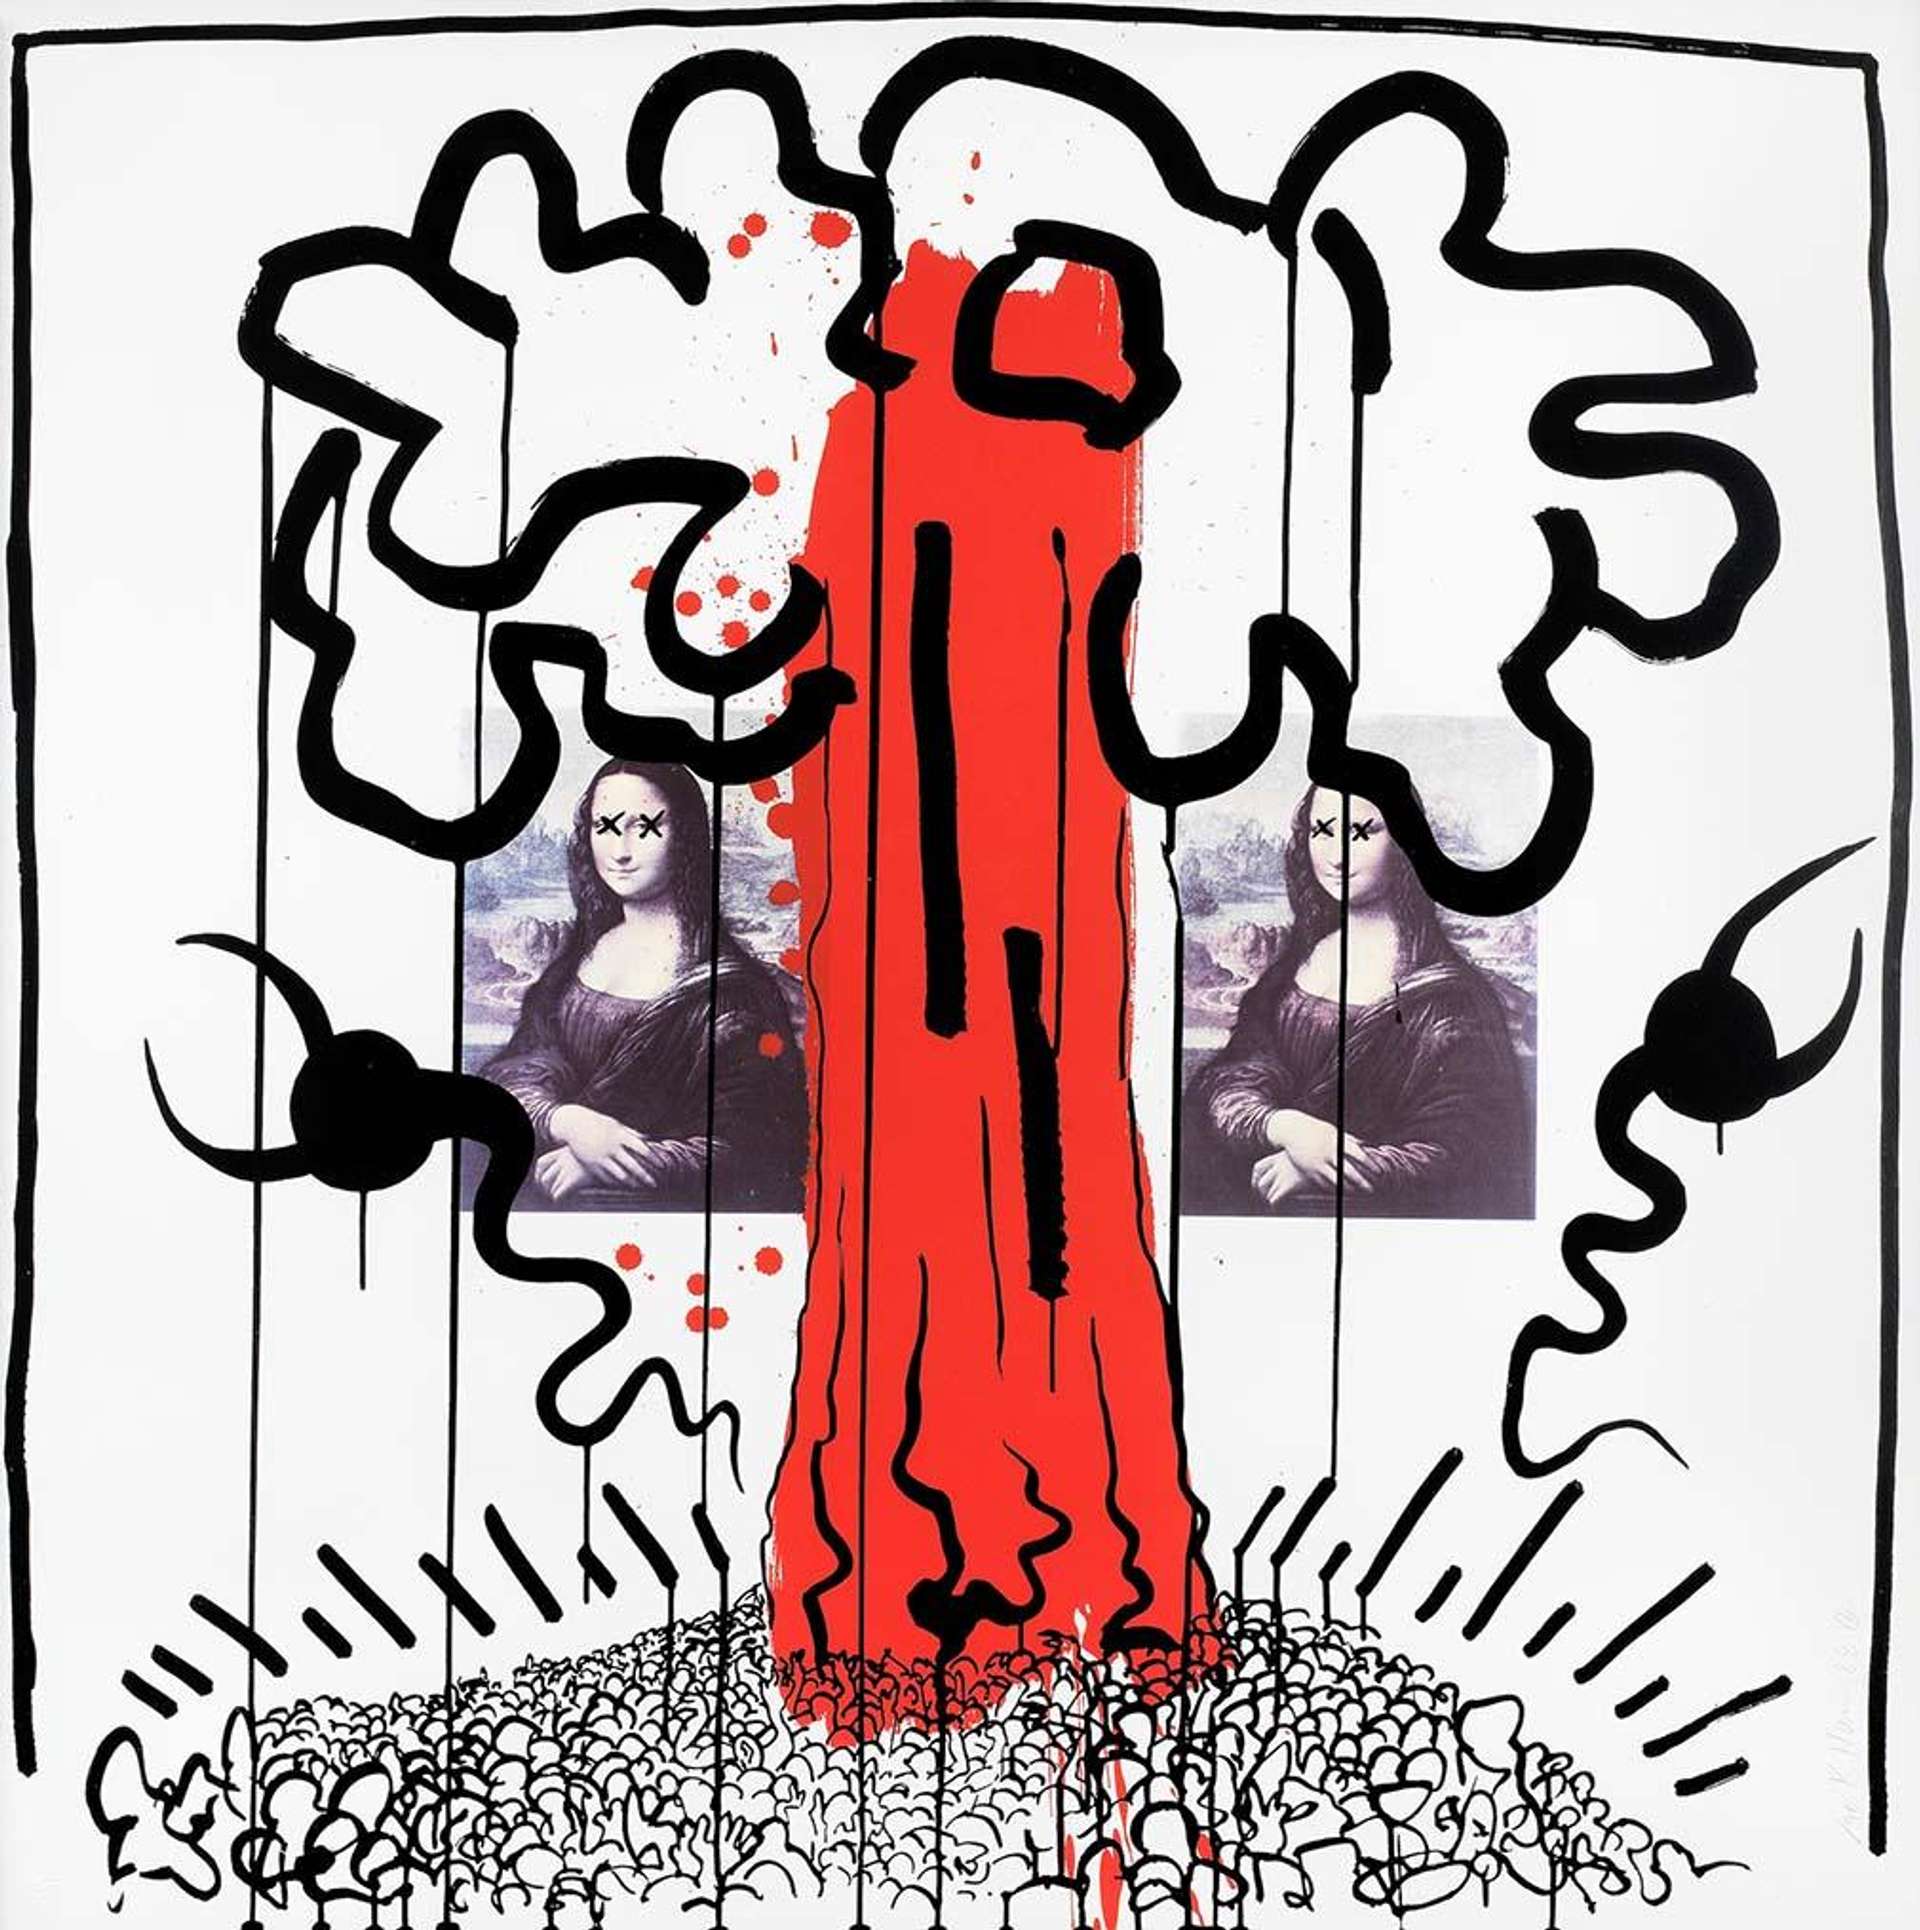 Keith Haring’s Apocalypse 1. A Pop Art screenprint collage featuring two photographs of the Mona Lisa and a red, animated phallus between them.